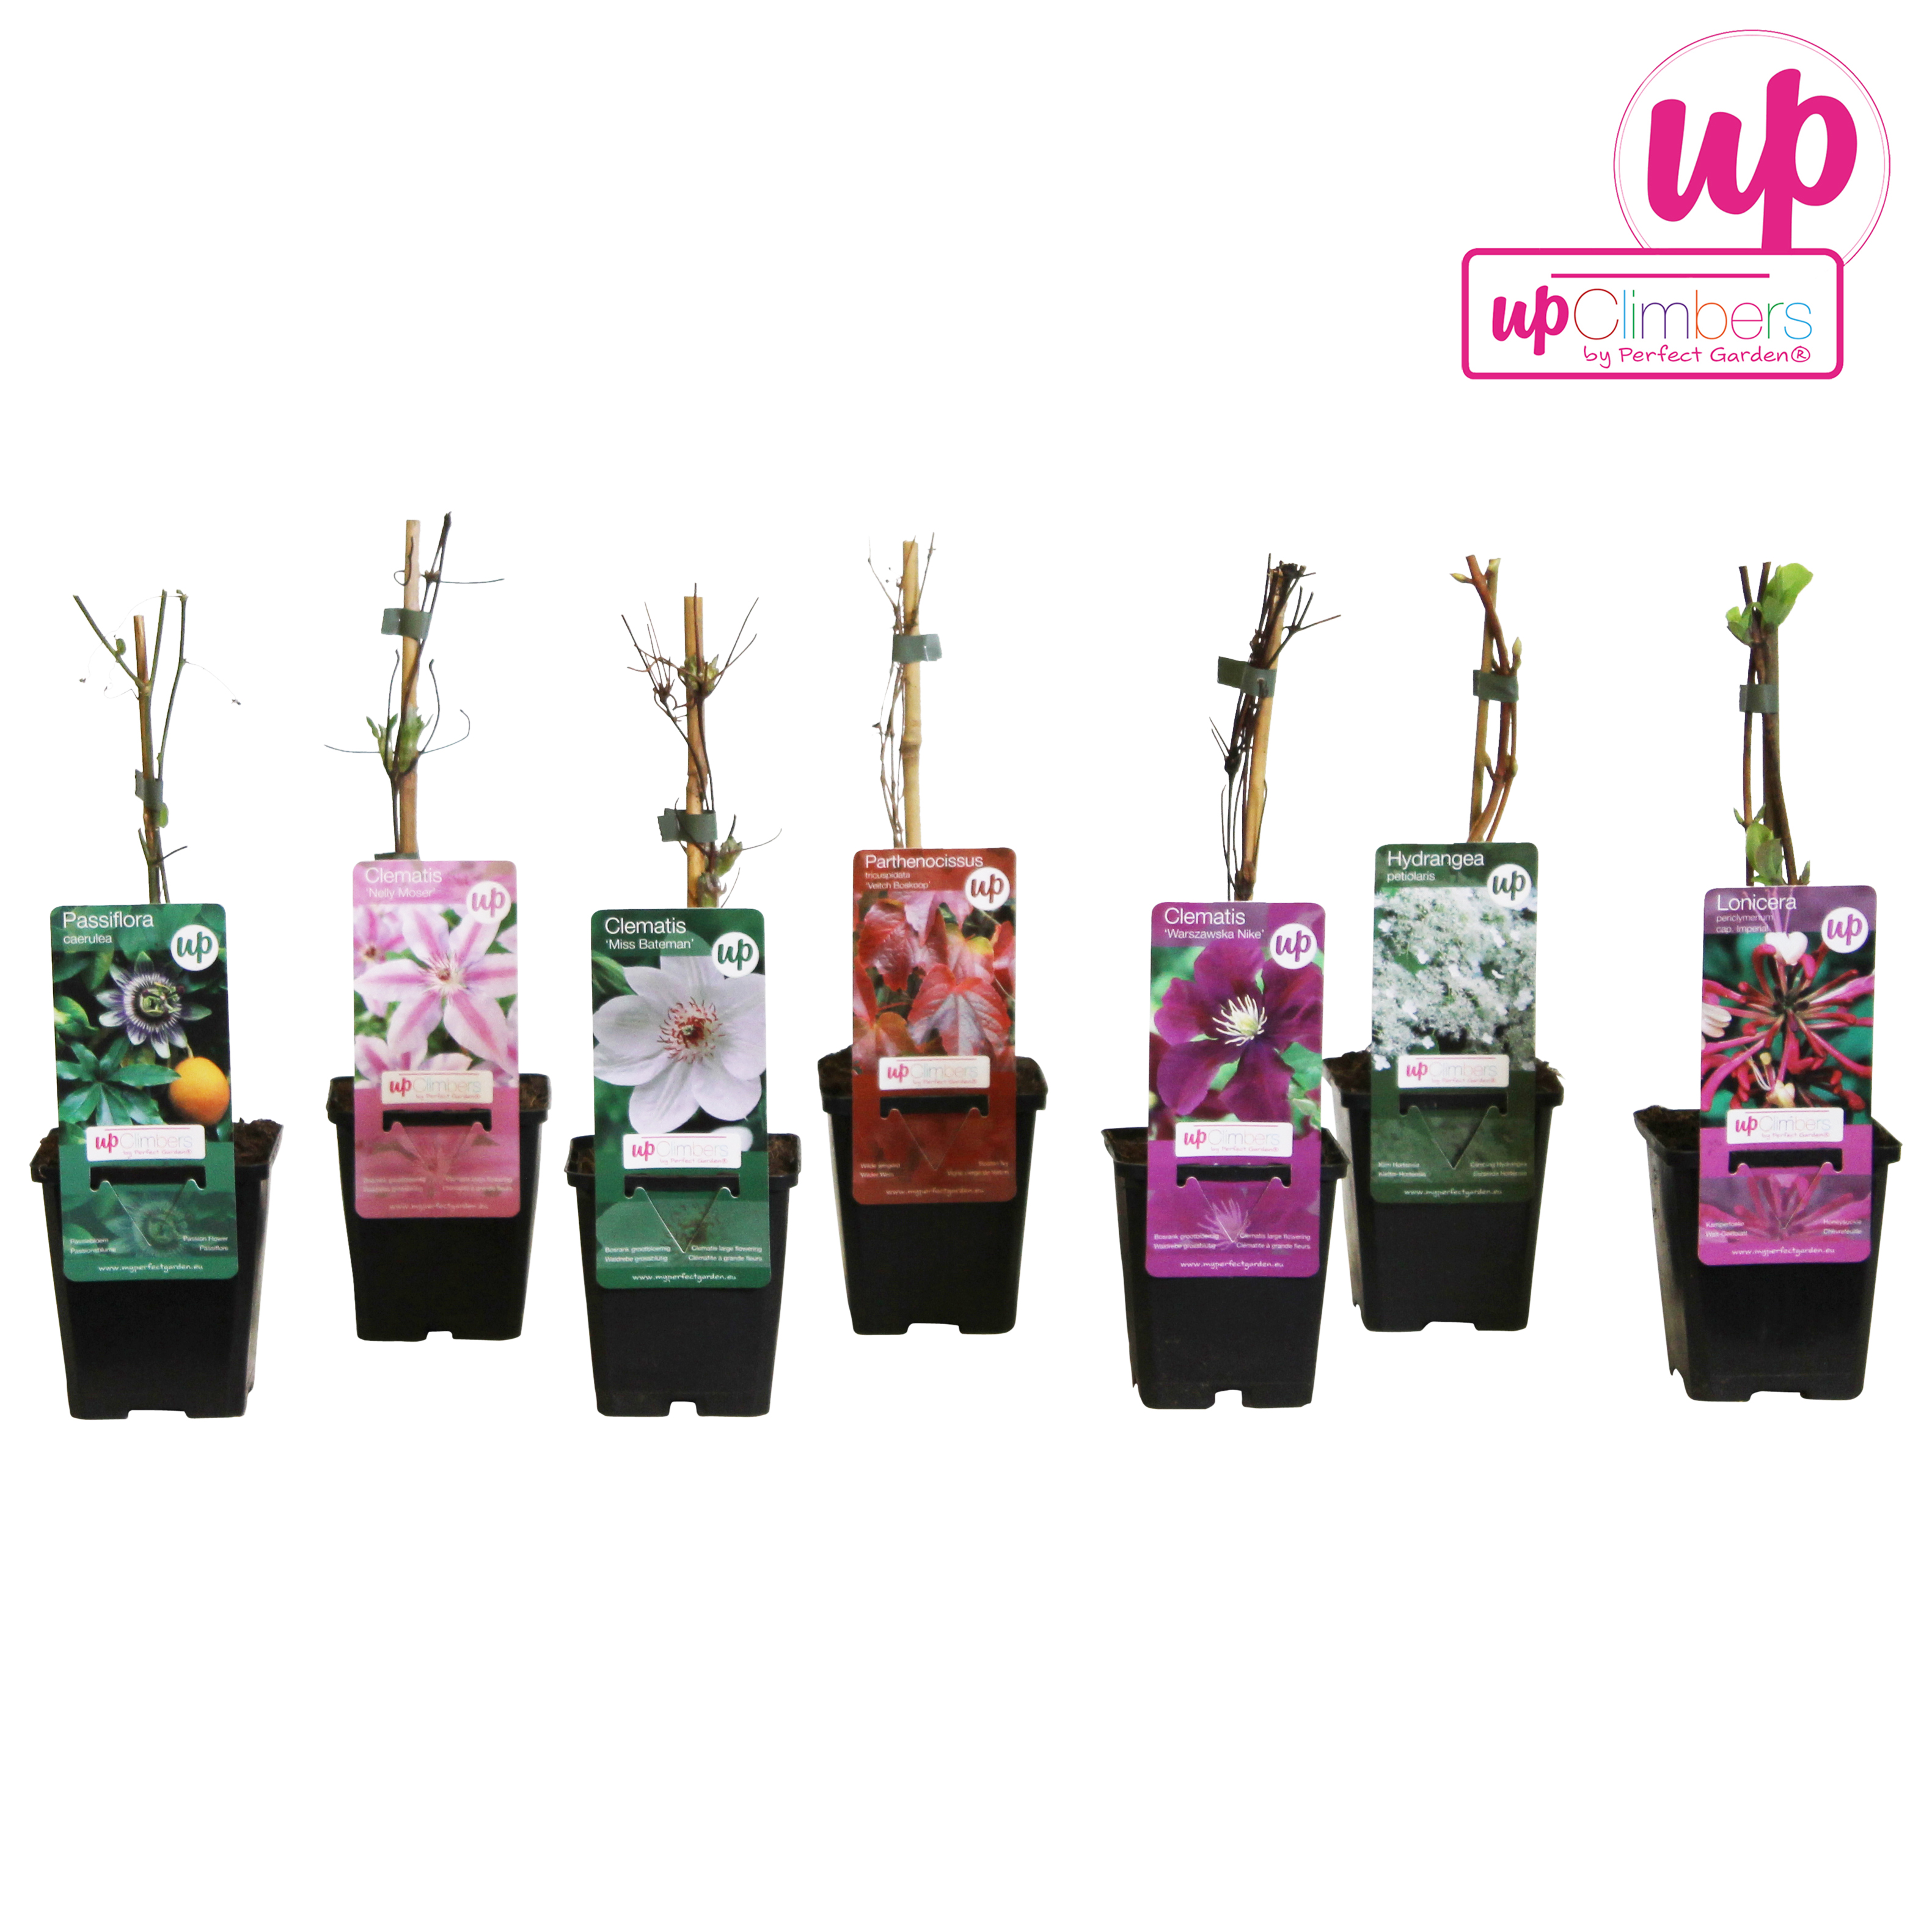 Picture of Clematis mix shelve budget P9